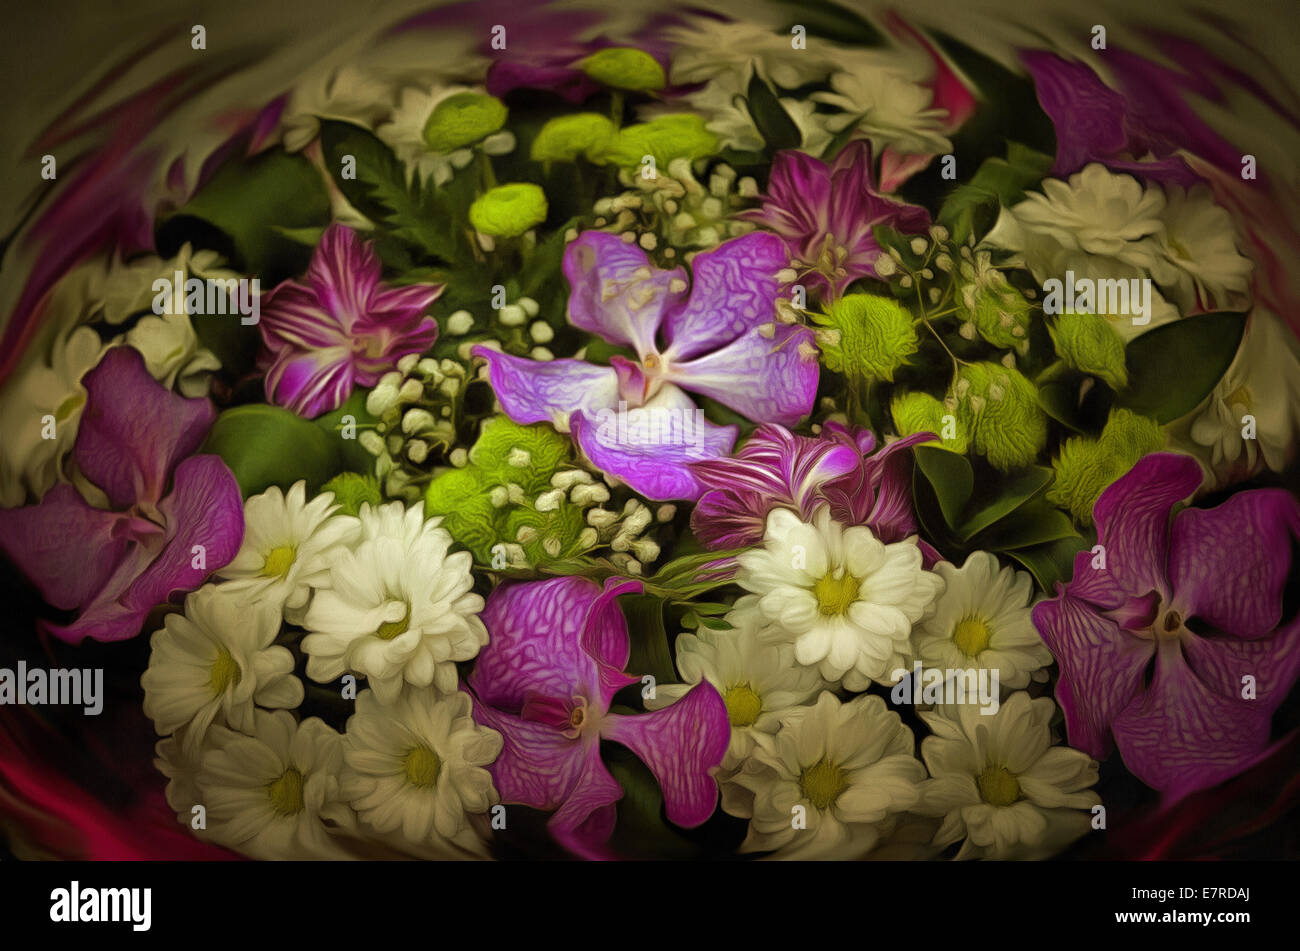 Illustrations flowers bouquet, Alstroemeria, white Chrysanthemum, painting, orchid Stock Photo